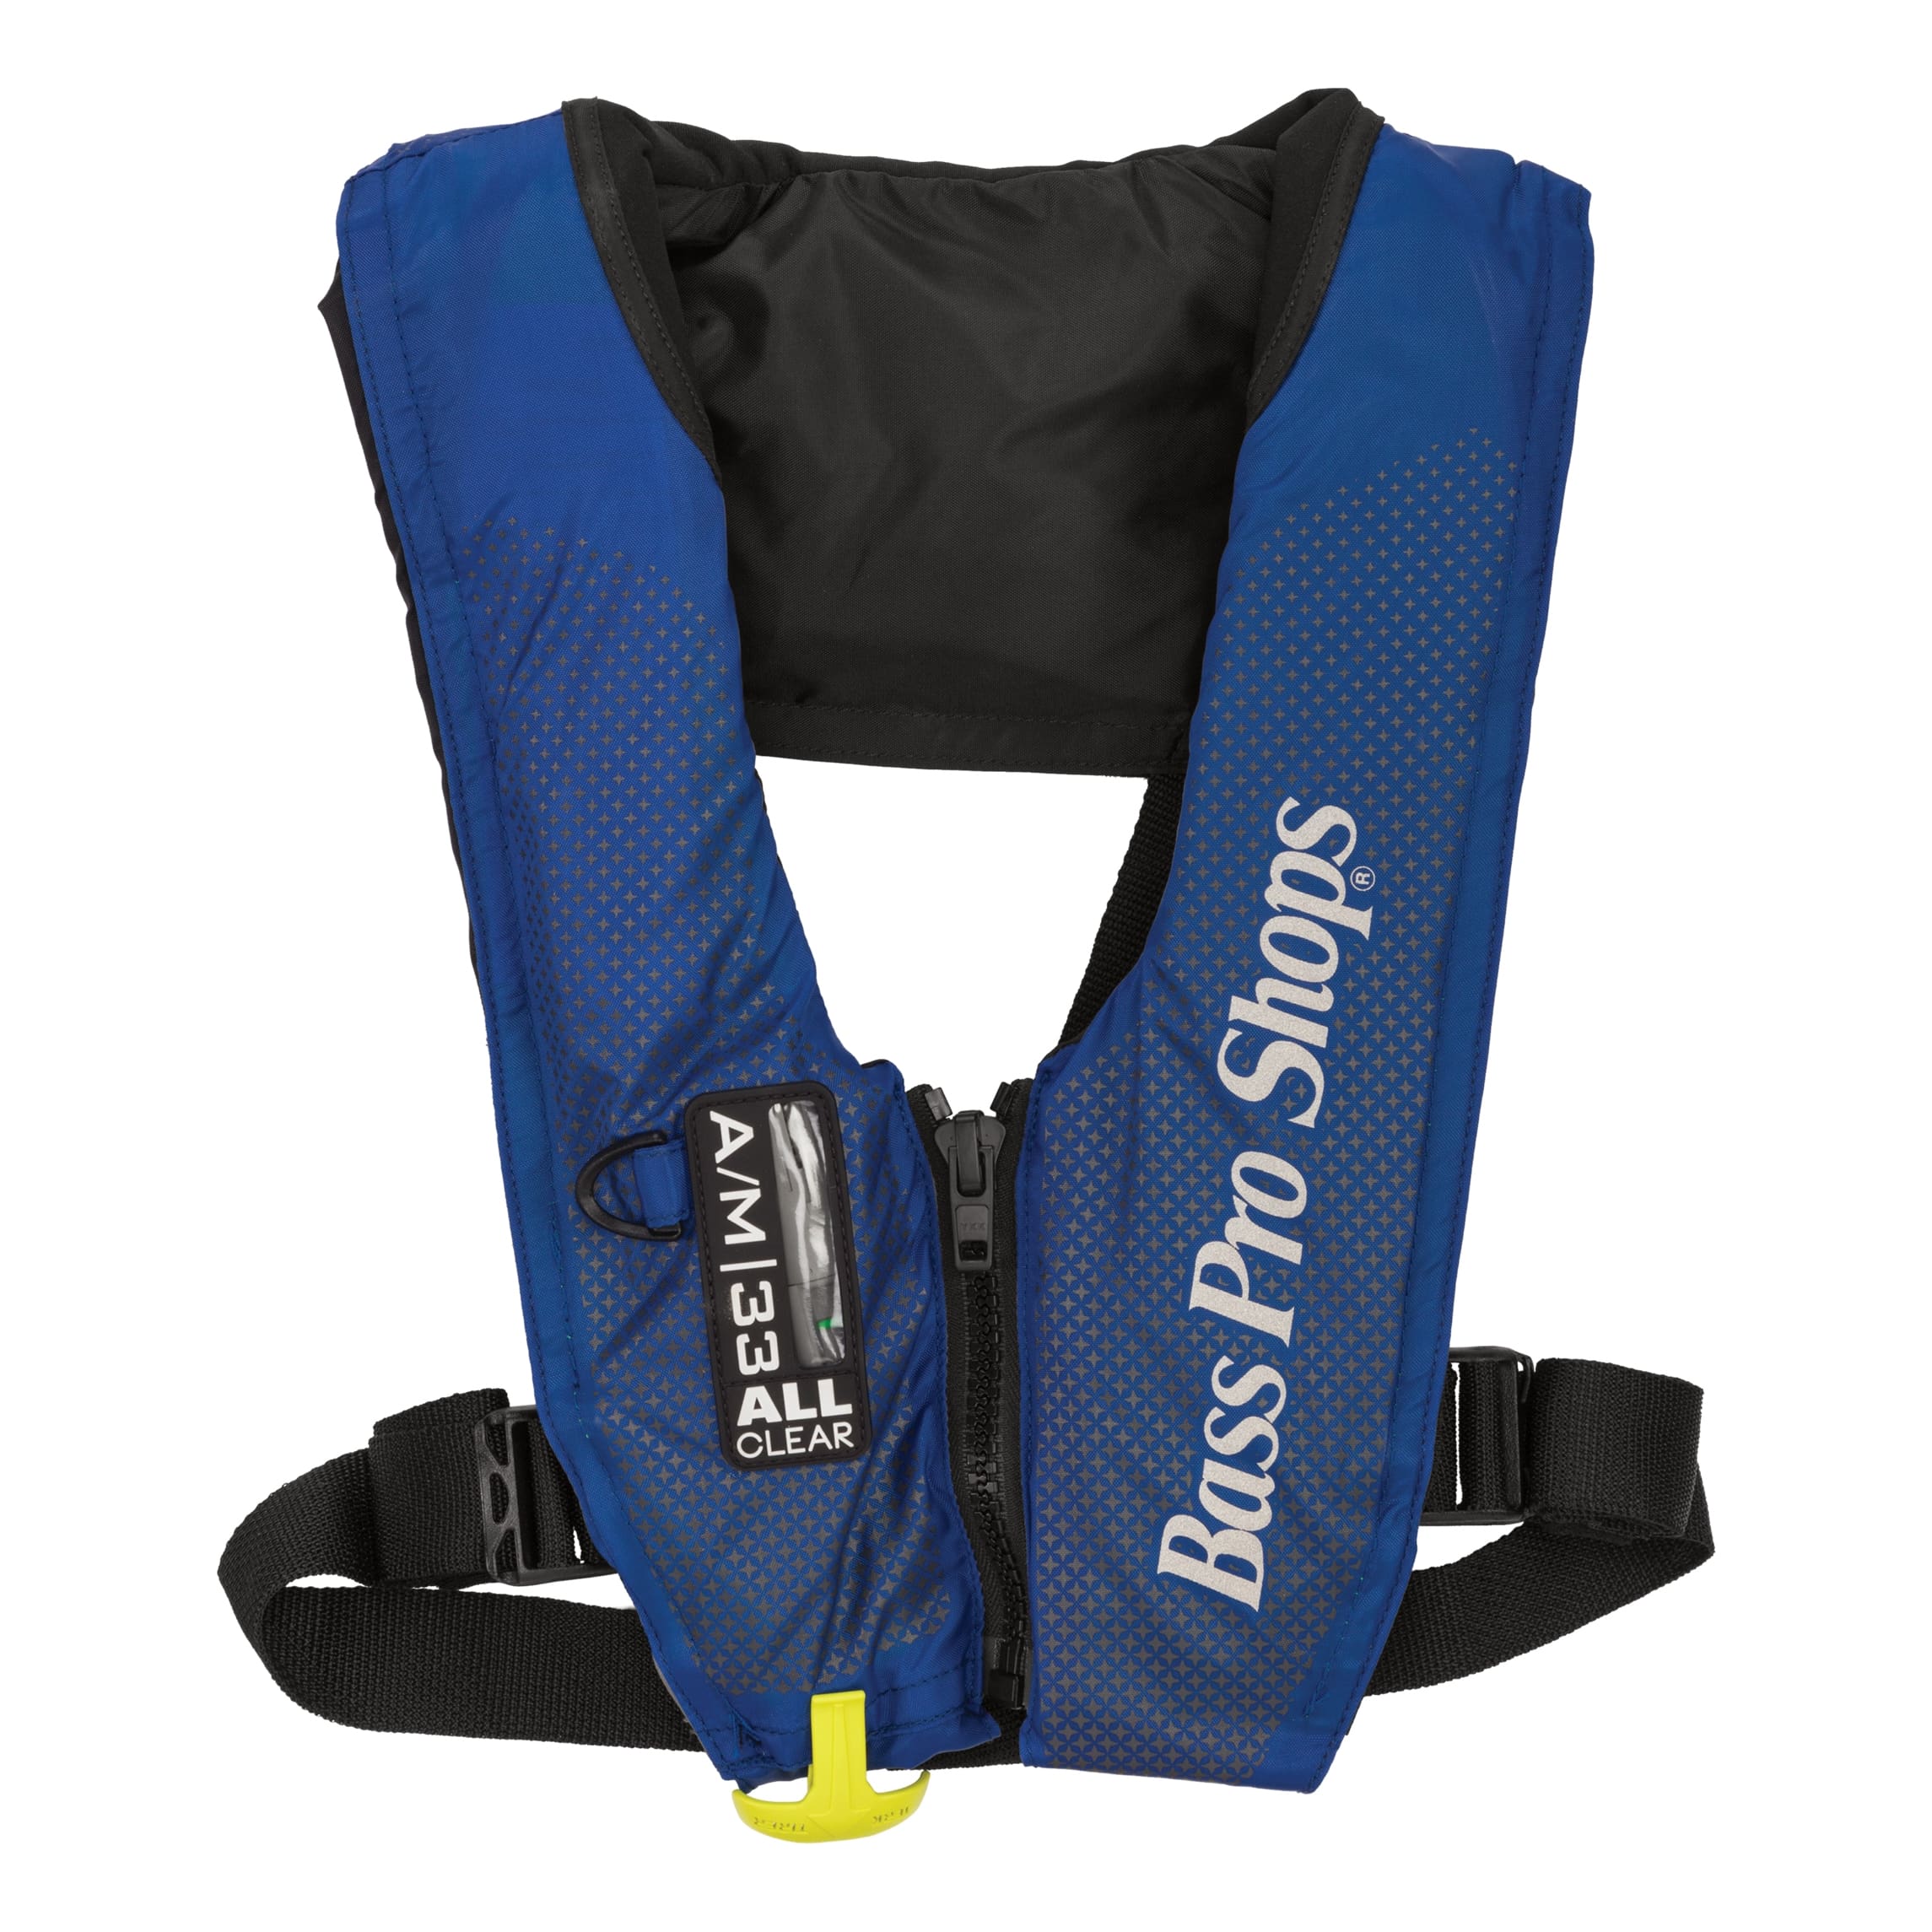 Bass Pro Shops® AM 33 All-Clear™ Auto/Manual-Inflatable Life Vest - Blue